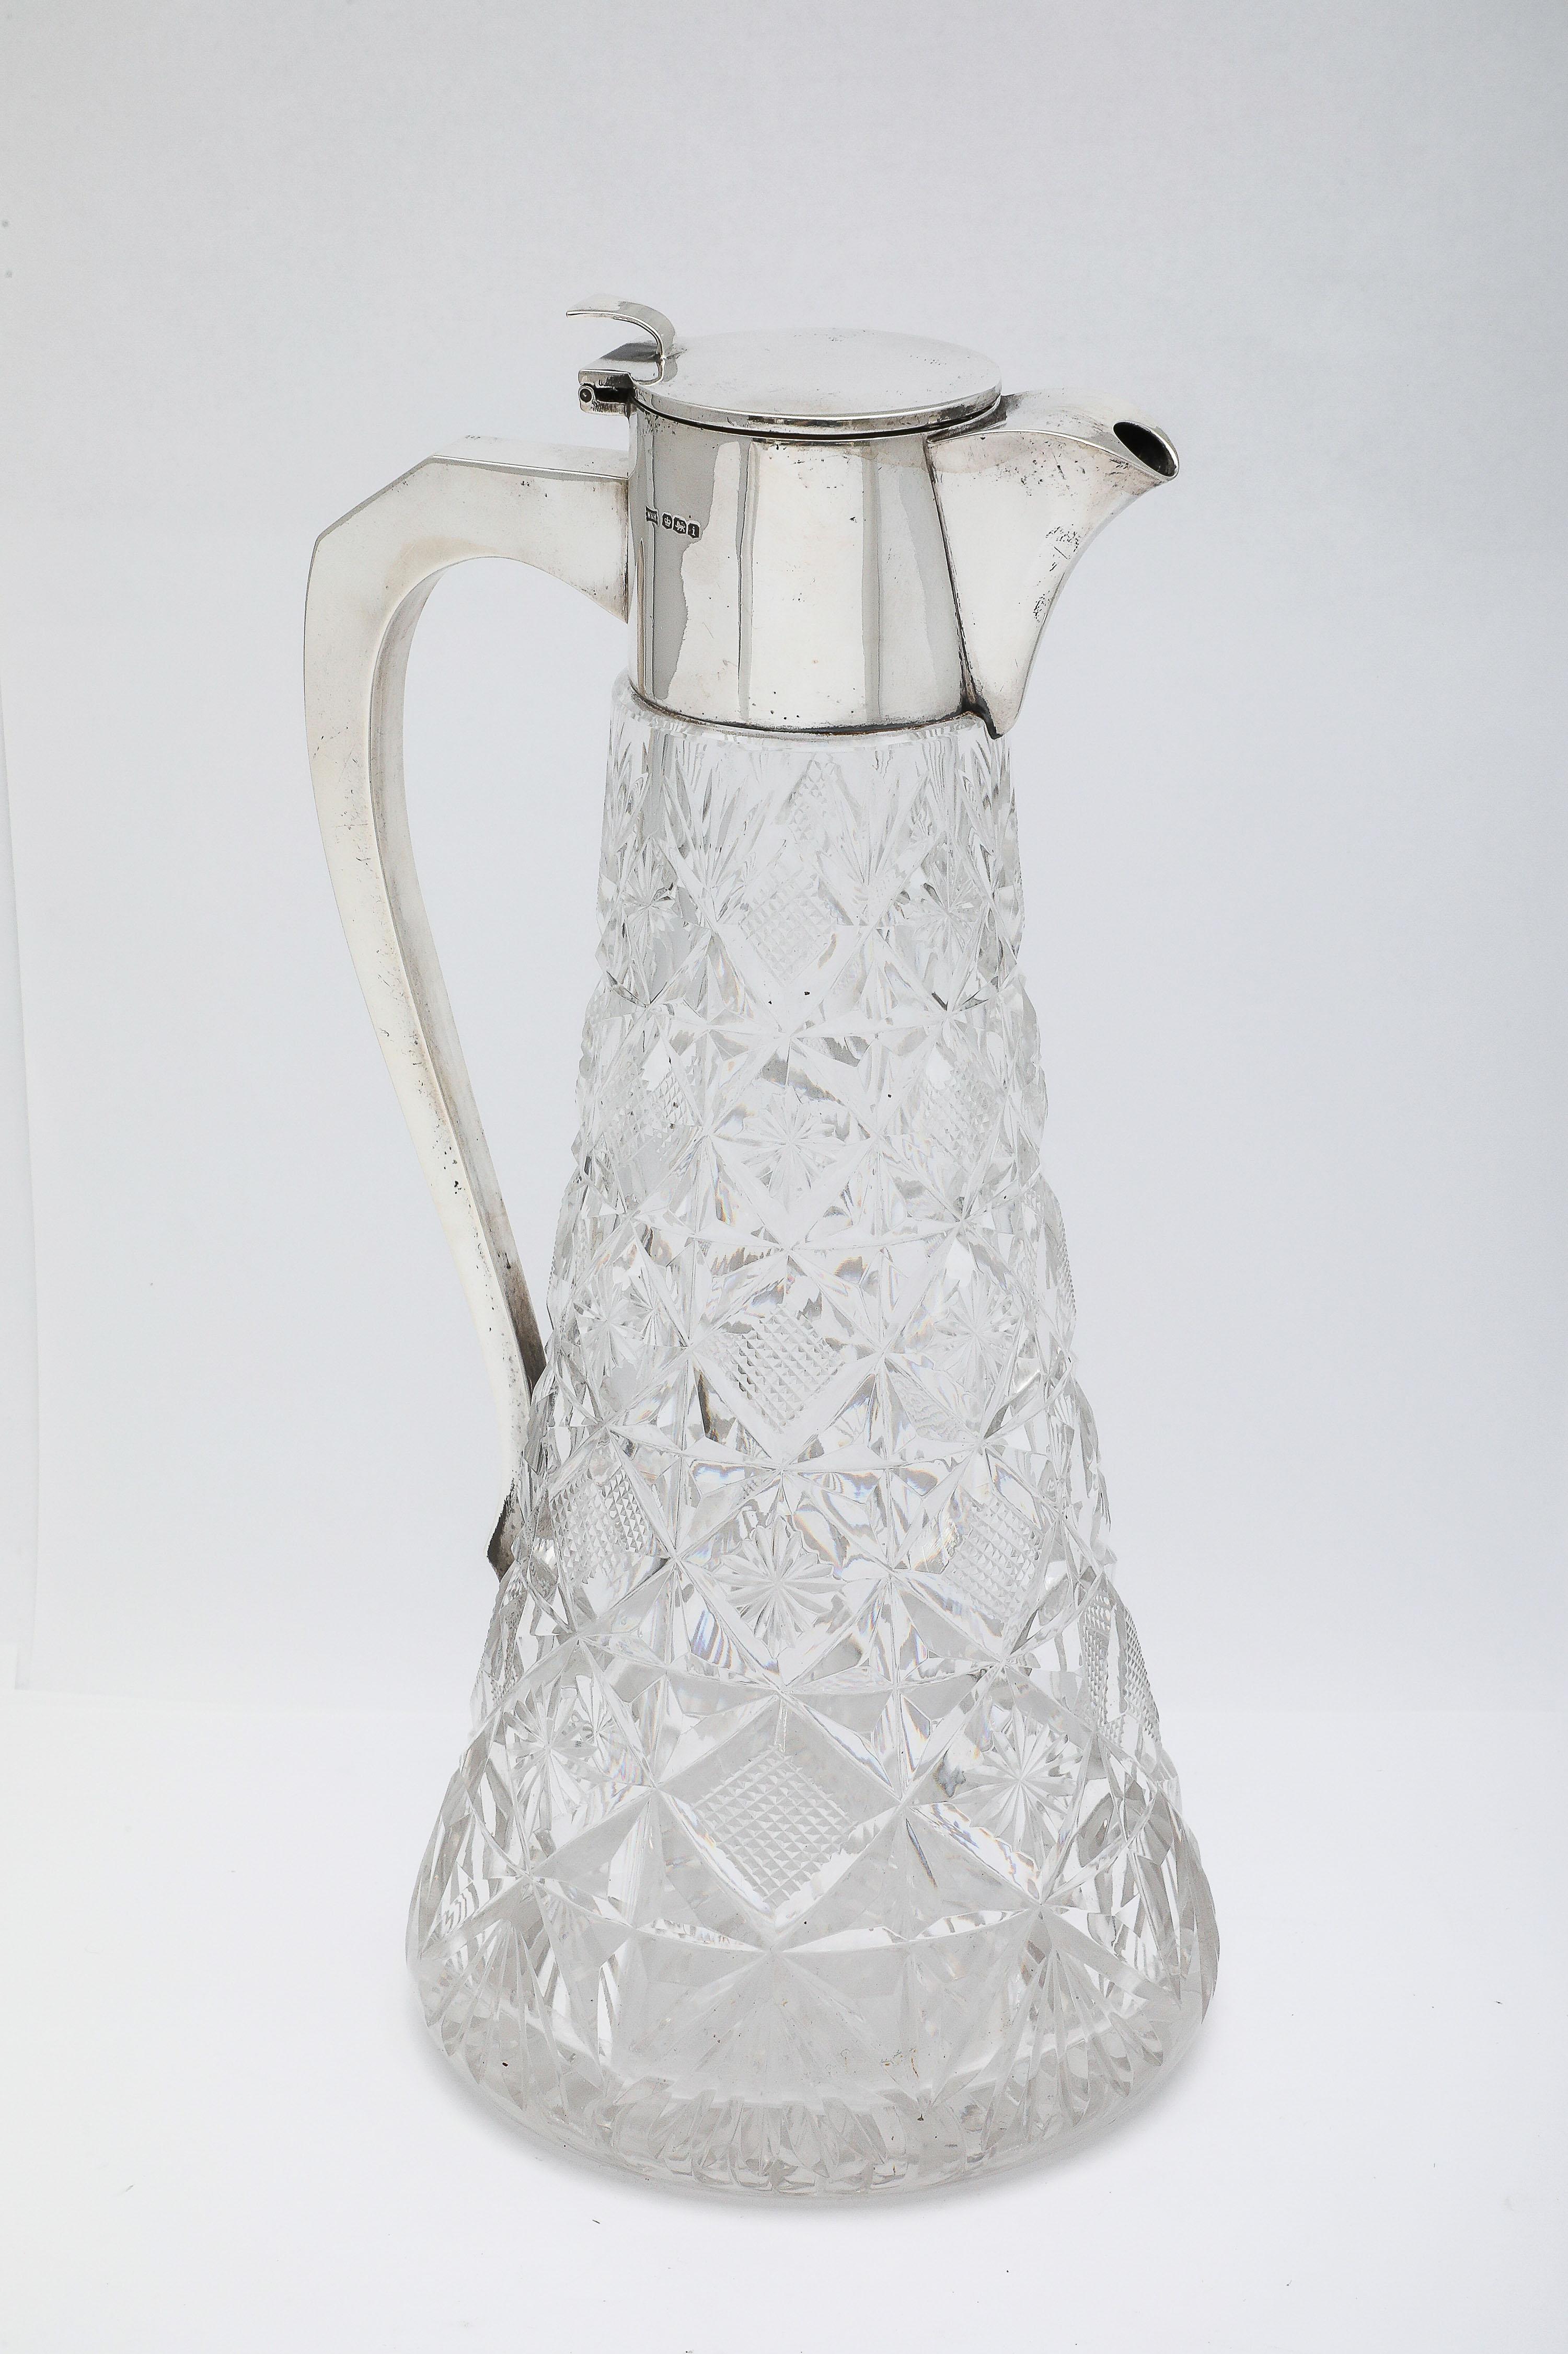 Large Edwardian Period Sterling Silver-Mounted Claret Jug For Sale 3